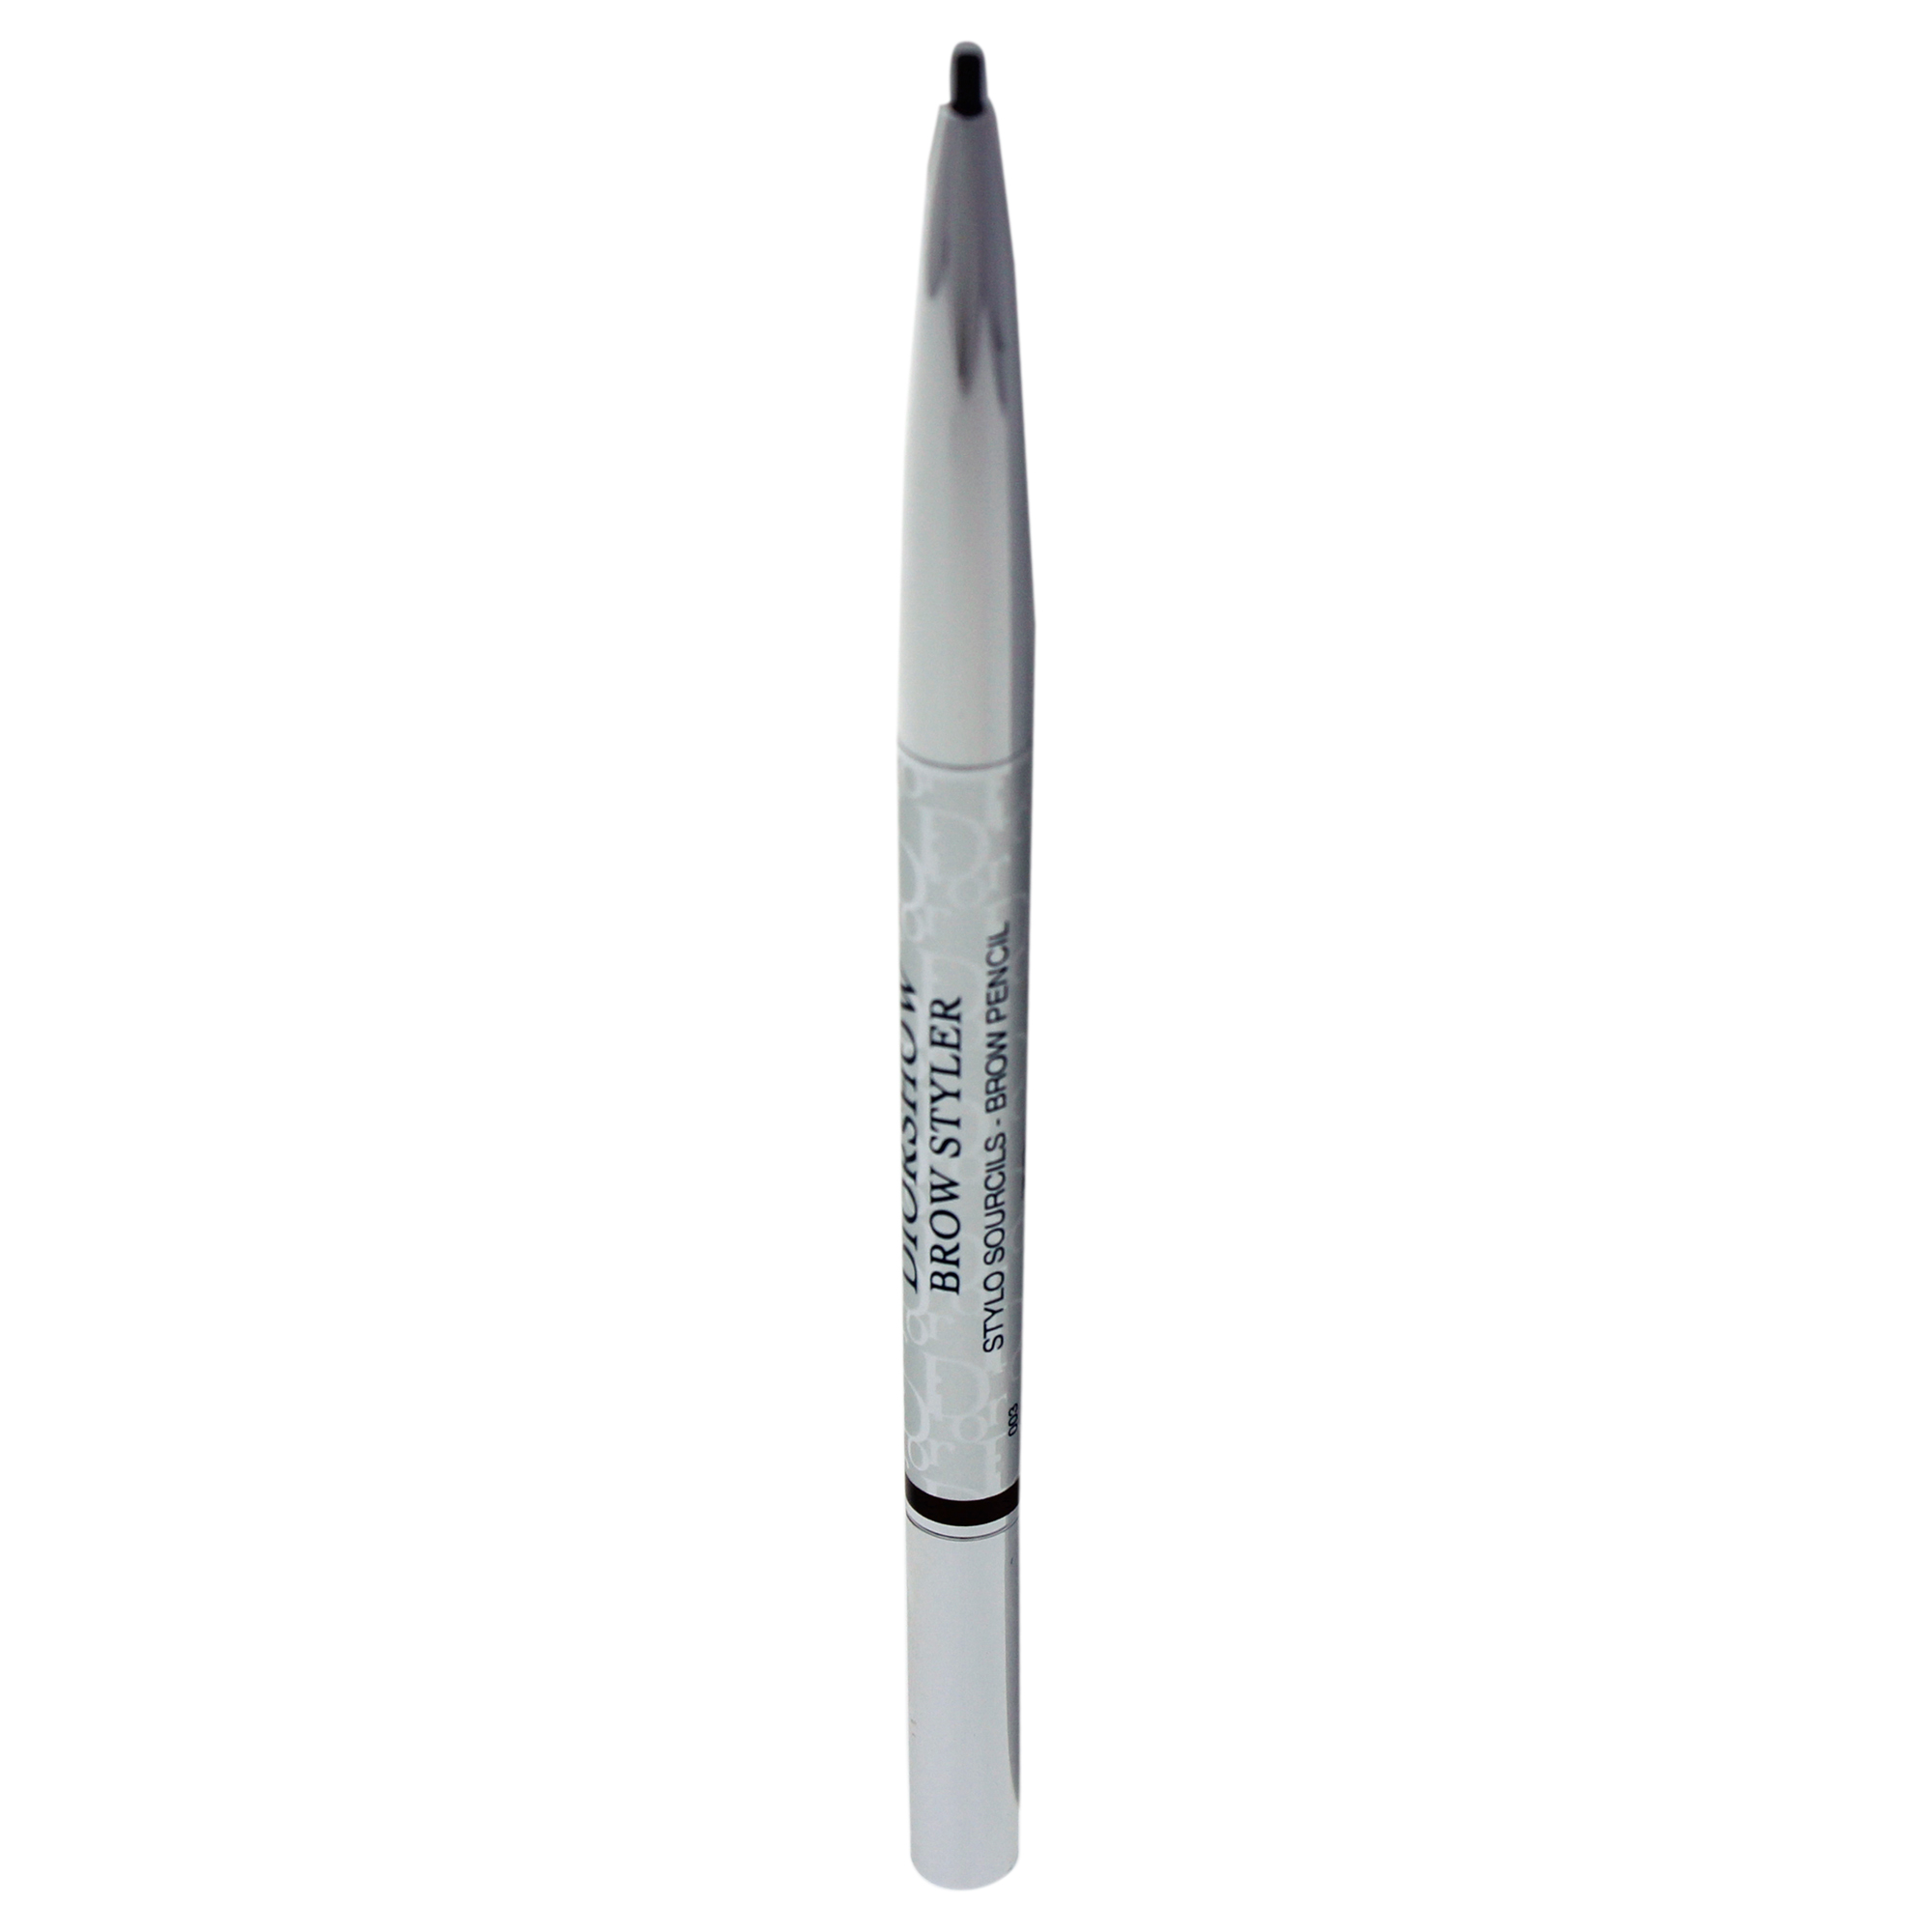 Diorshow Brow Styler Ultra-Fine Precision Brow Pencil - # 003 Auburn by Christian Dior for Women - 0.003 oz Eyebrow Pencil - image 2 of 2